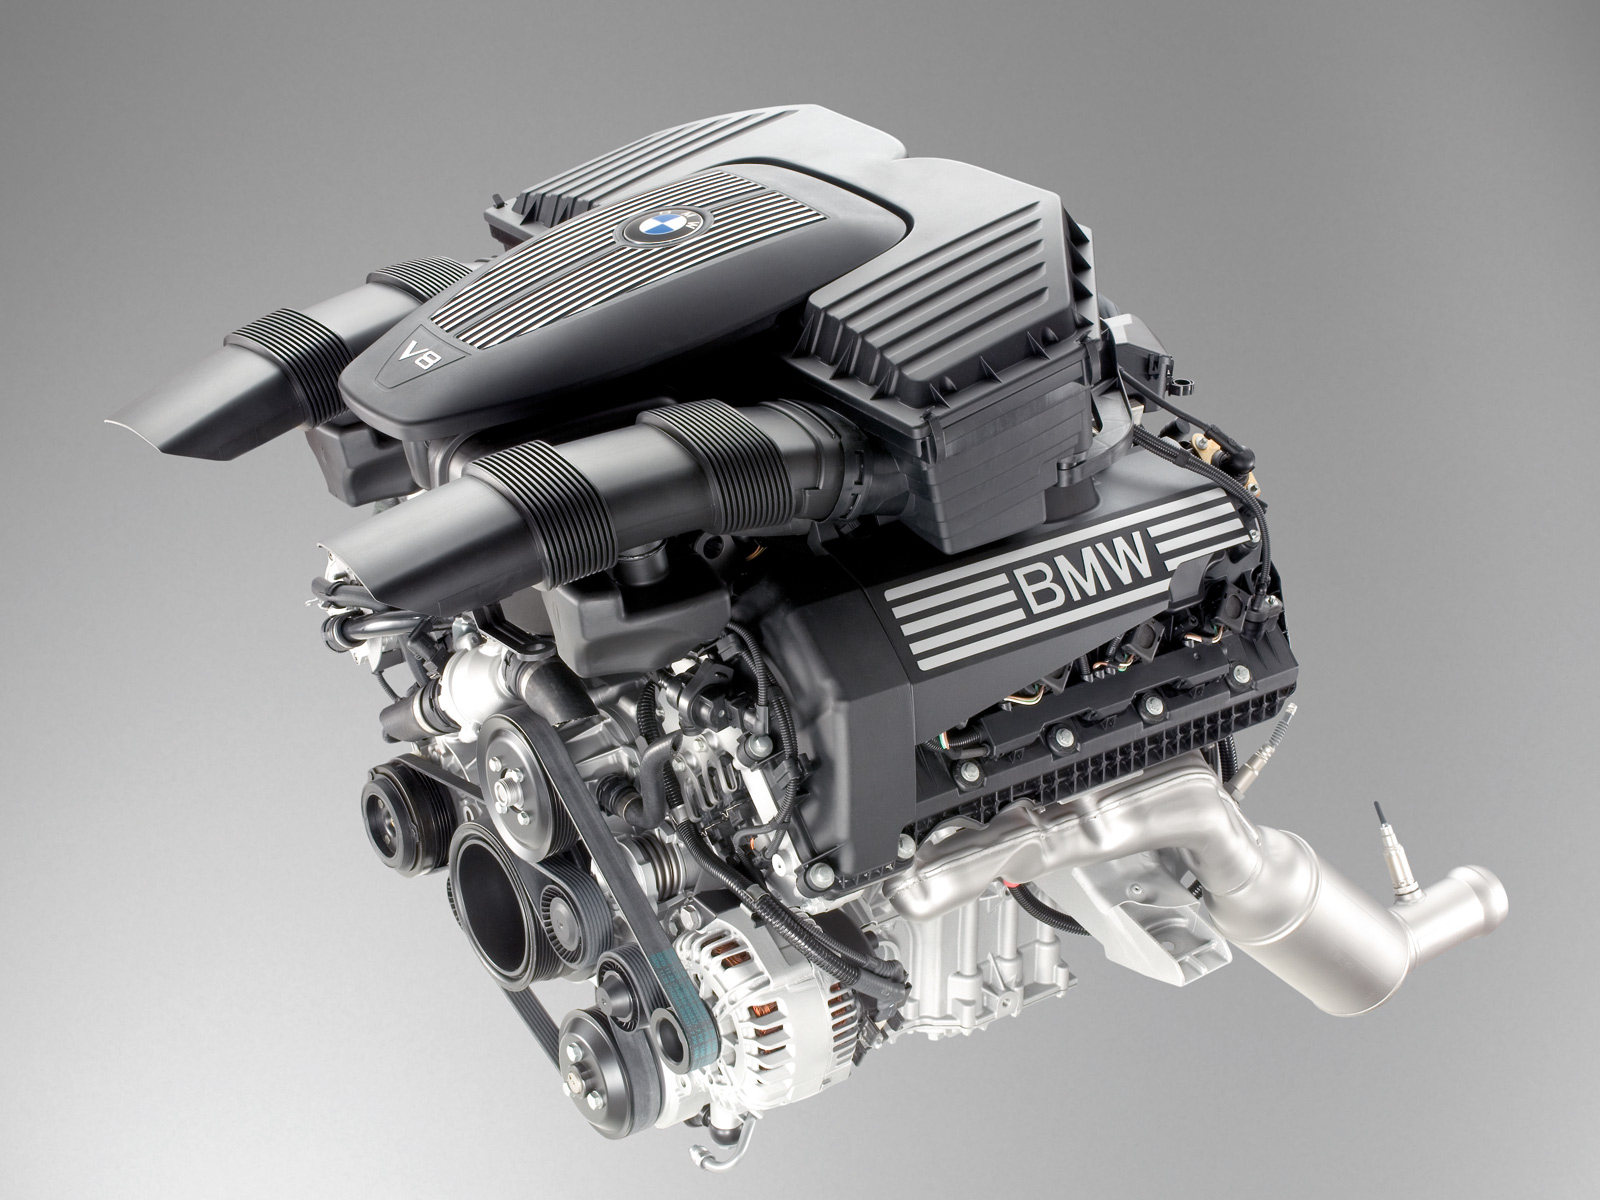 Bmw n62b48 engine | reliability, tuning, issues, oil